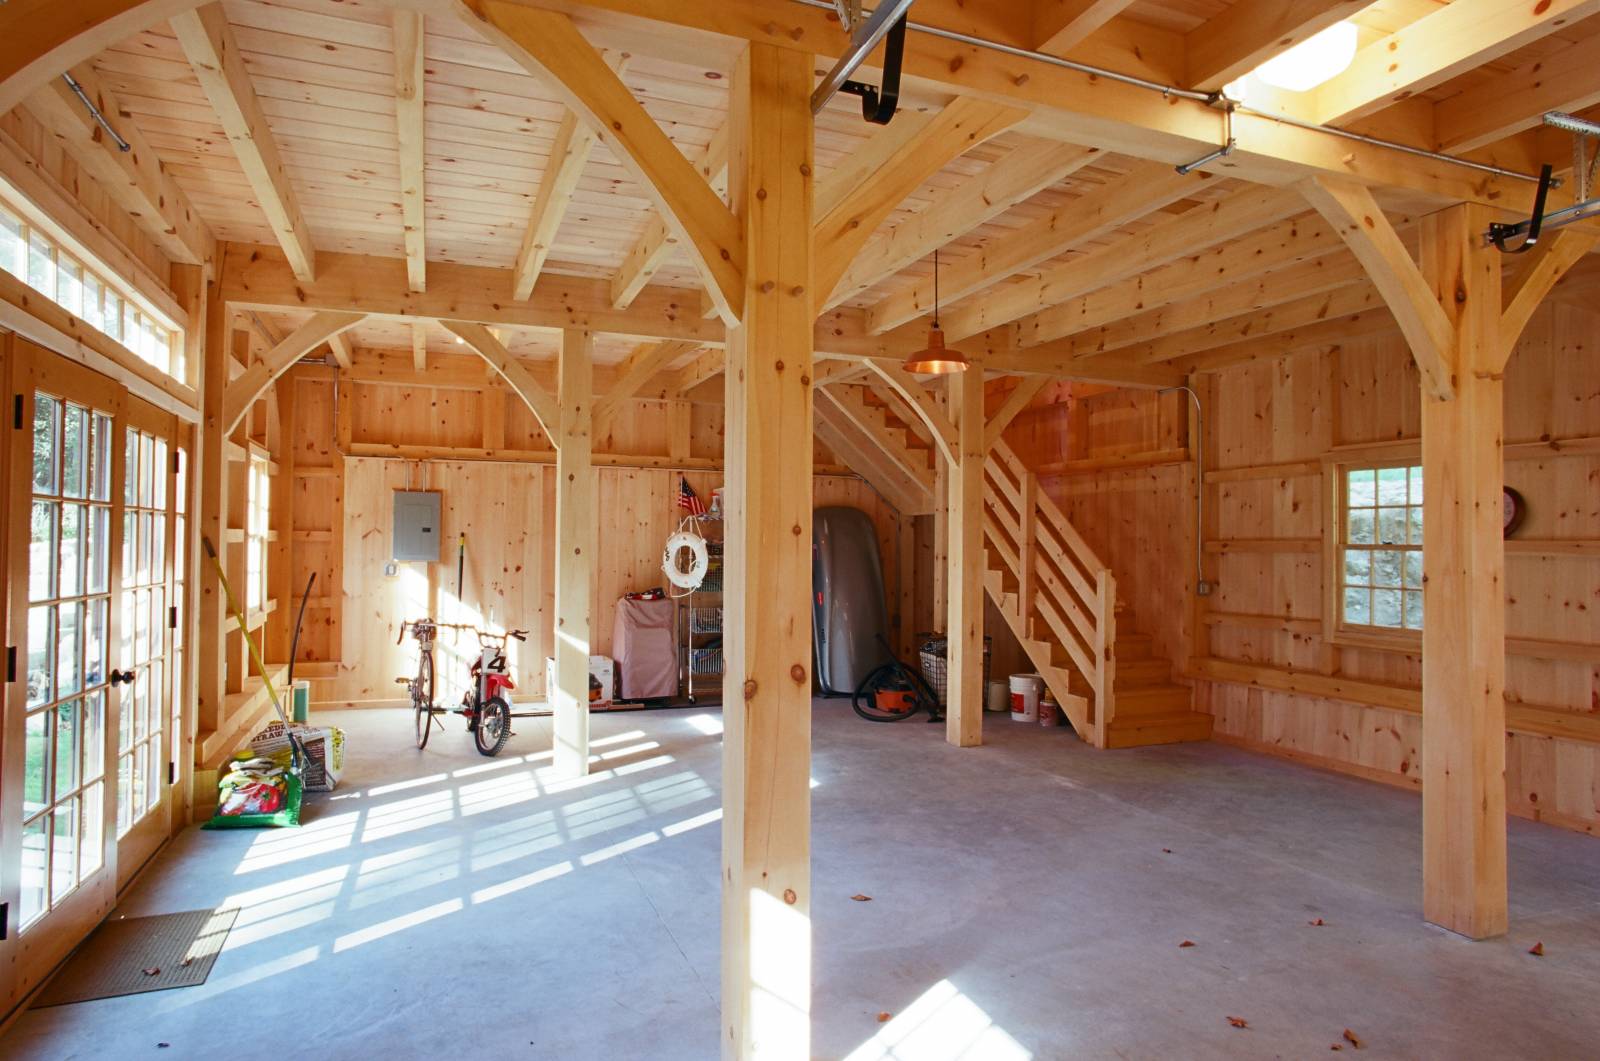 The bank barn is built into a hillside (notice the foundation wall in this first floor photo that has been hidden with shiplap pine)